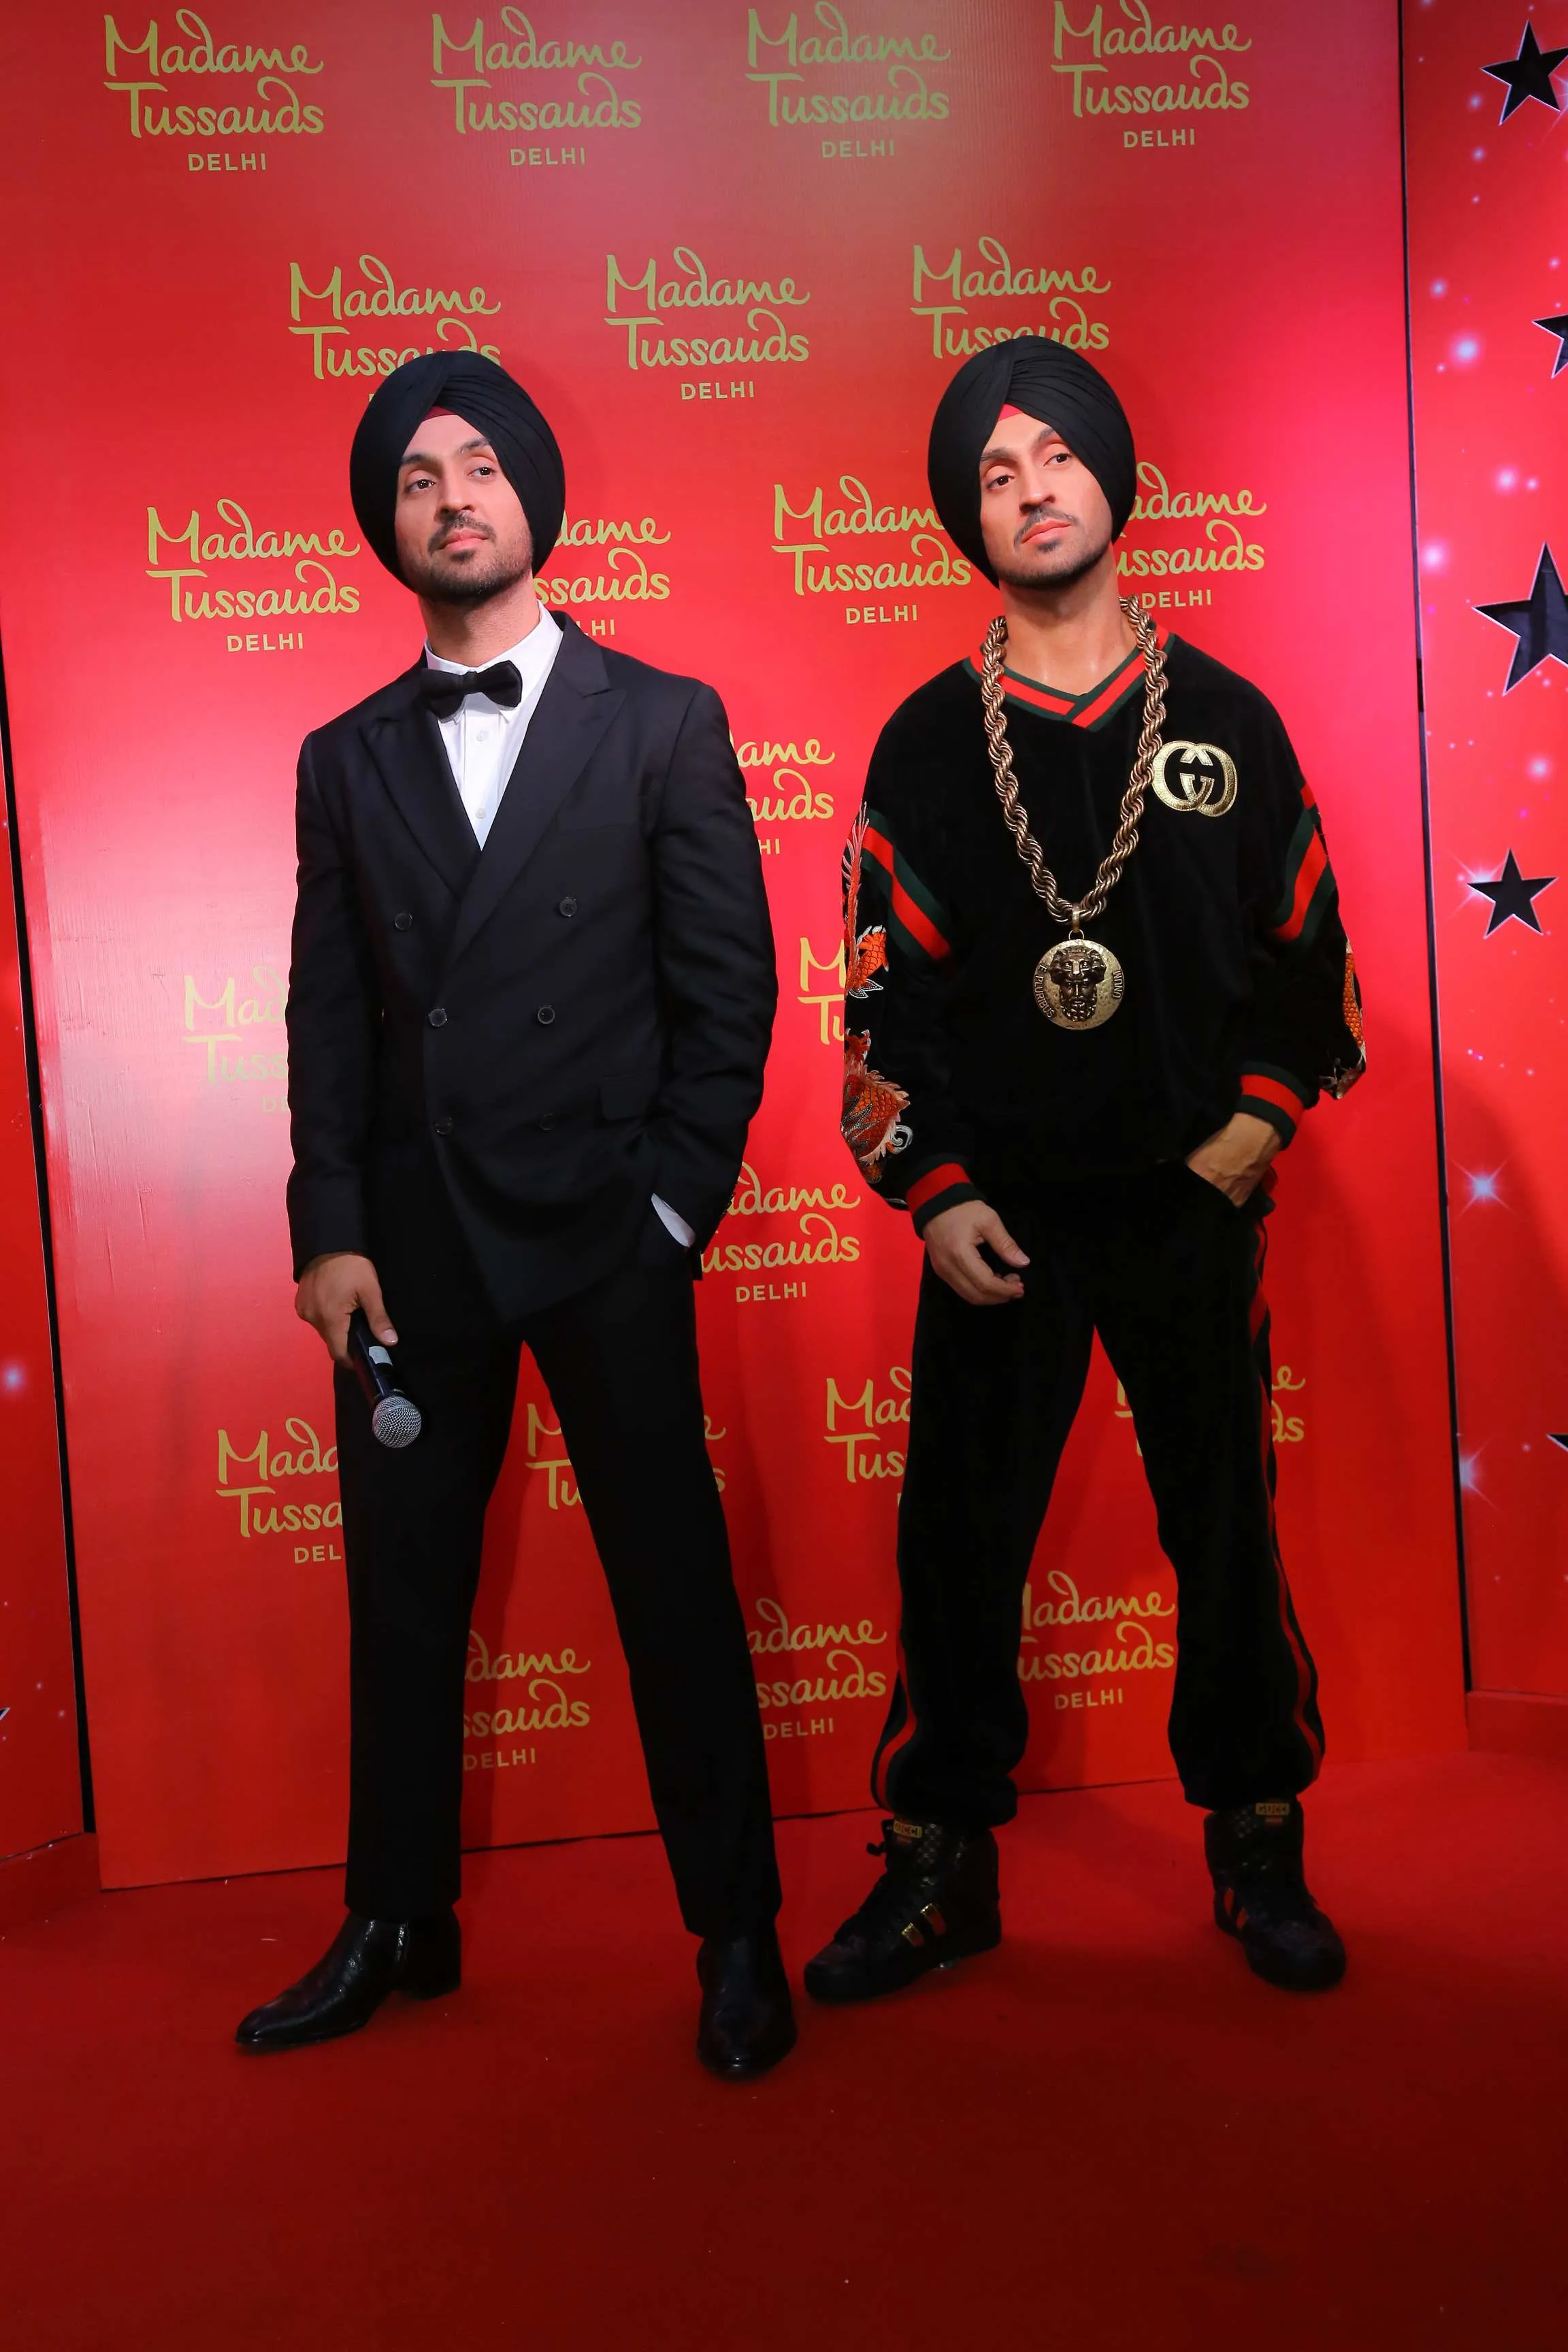 Diljit Dosanjh with his figure 